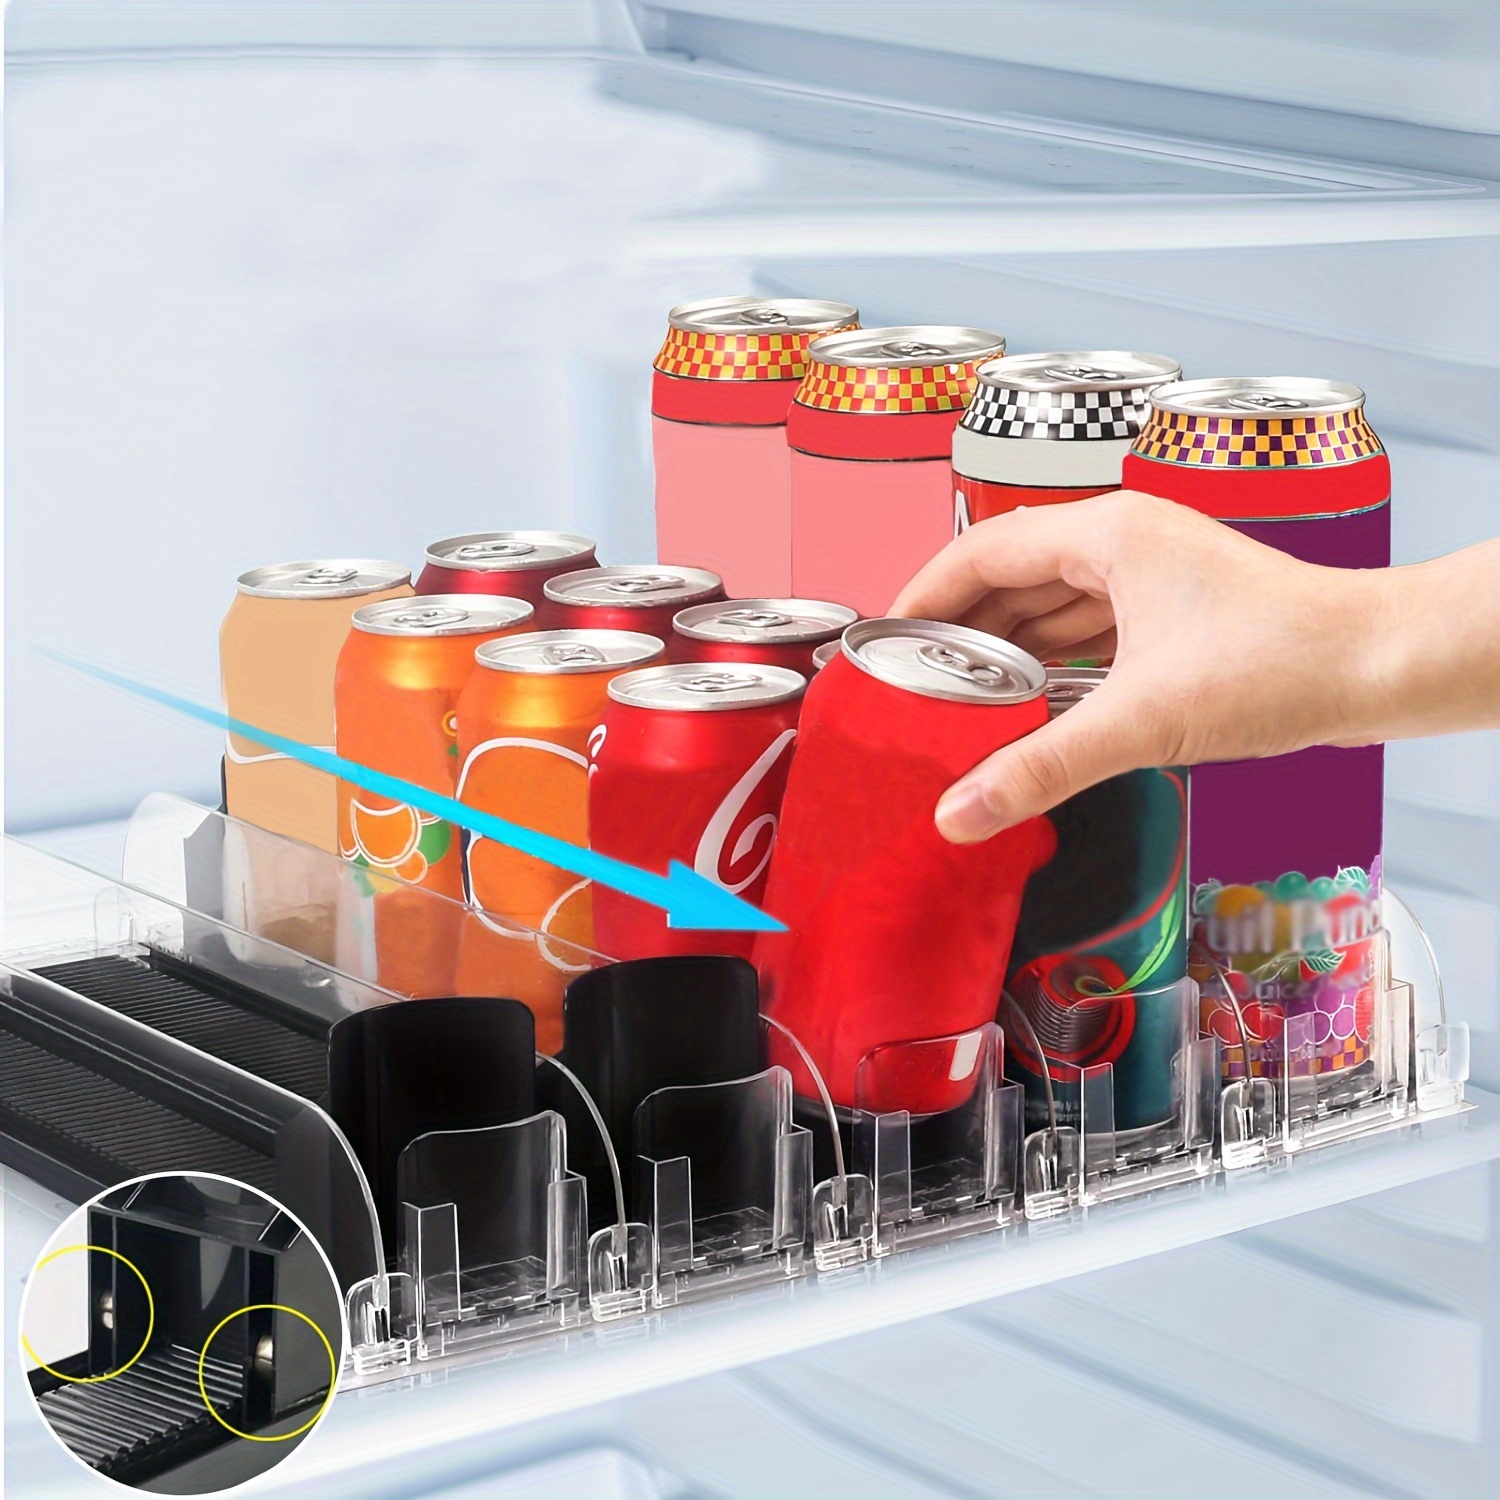 Drink Organizer for Fridge, Self Pushing Soda Can Dispenser for Refrige, 5  Row Black Ajustable, Beer Pop Can Water Bottle Storage Pantry 